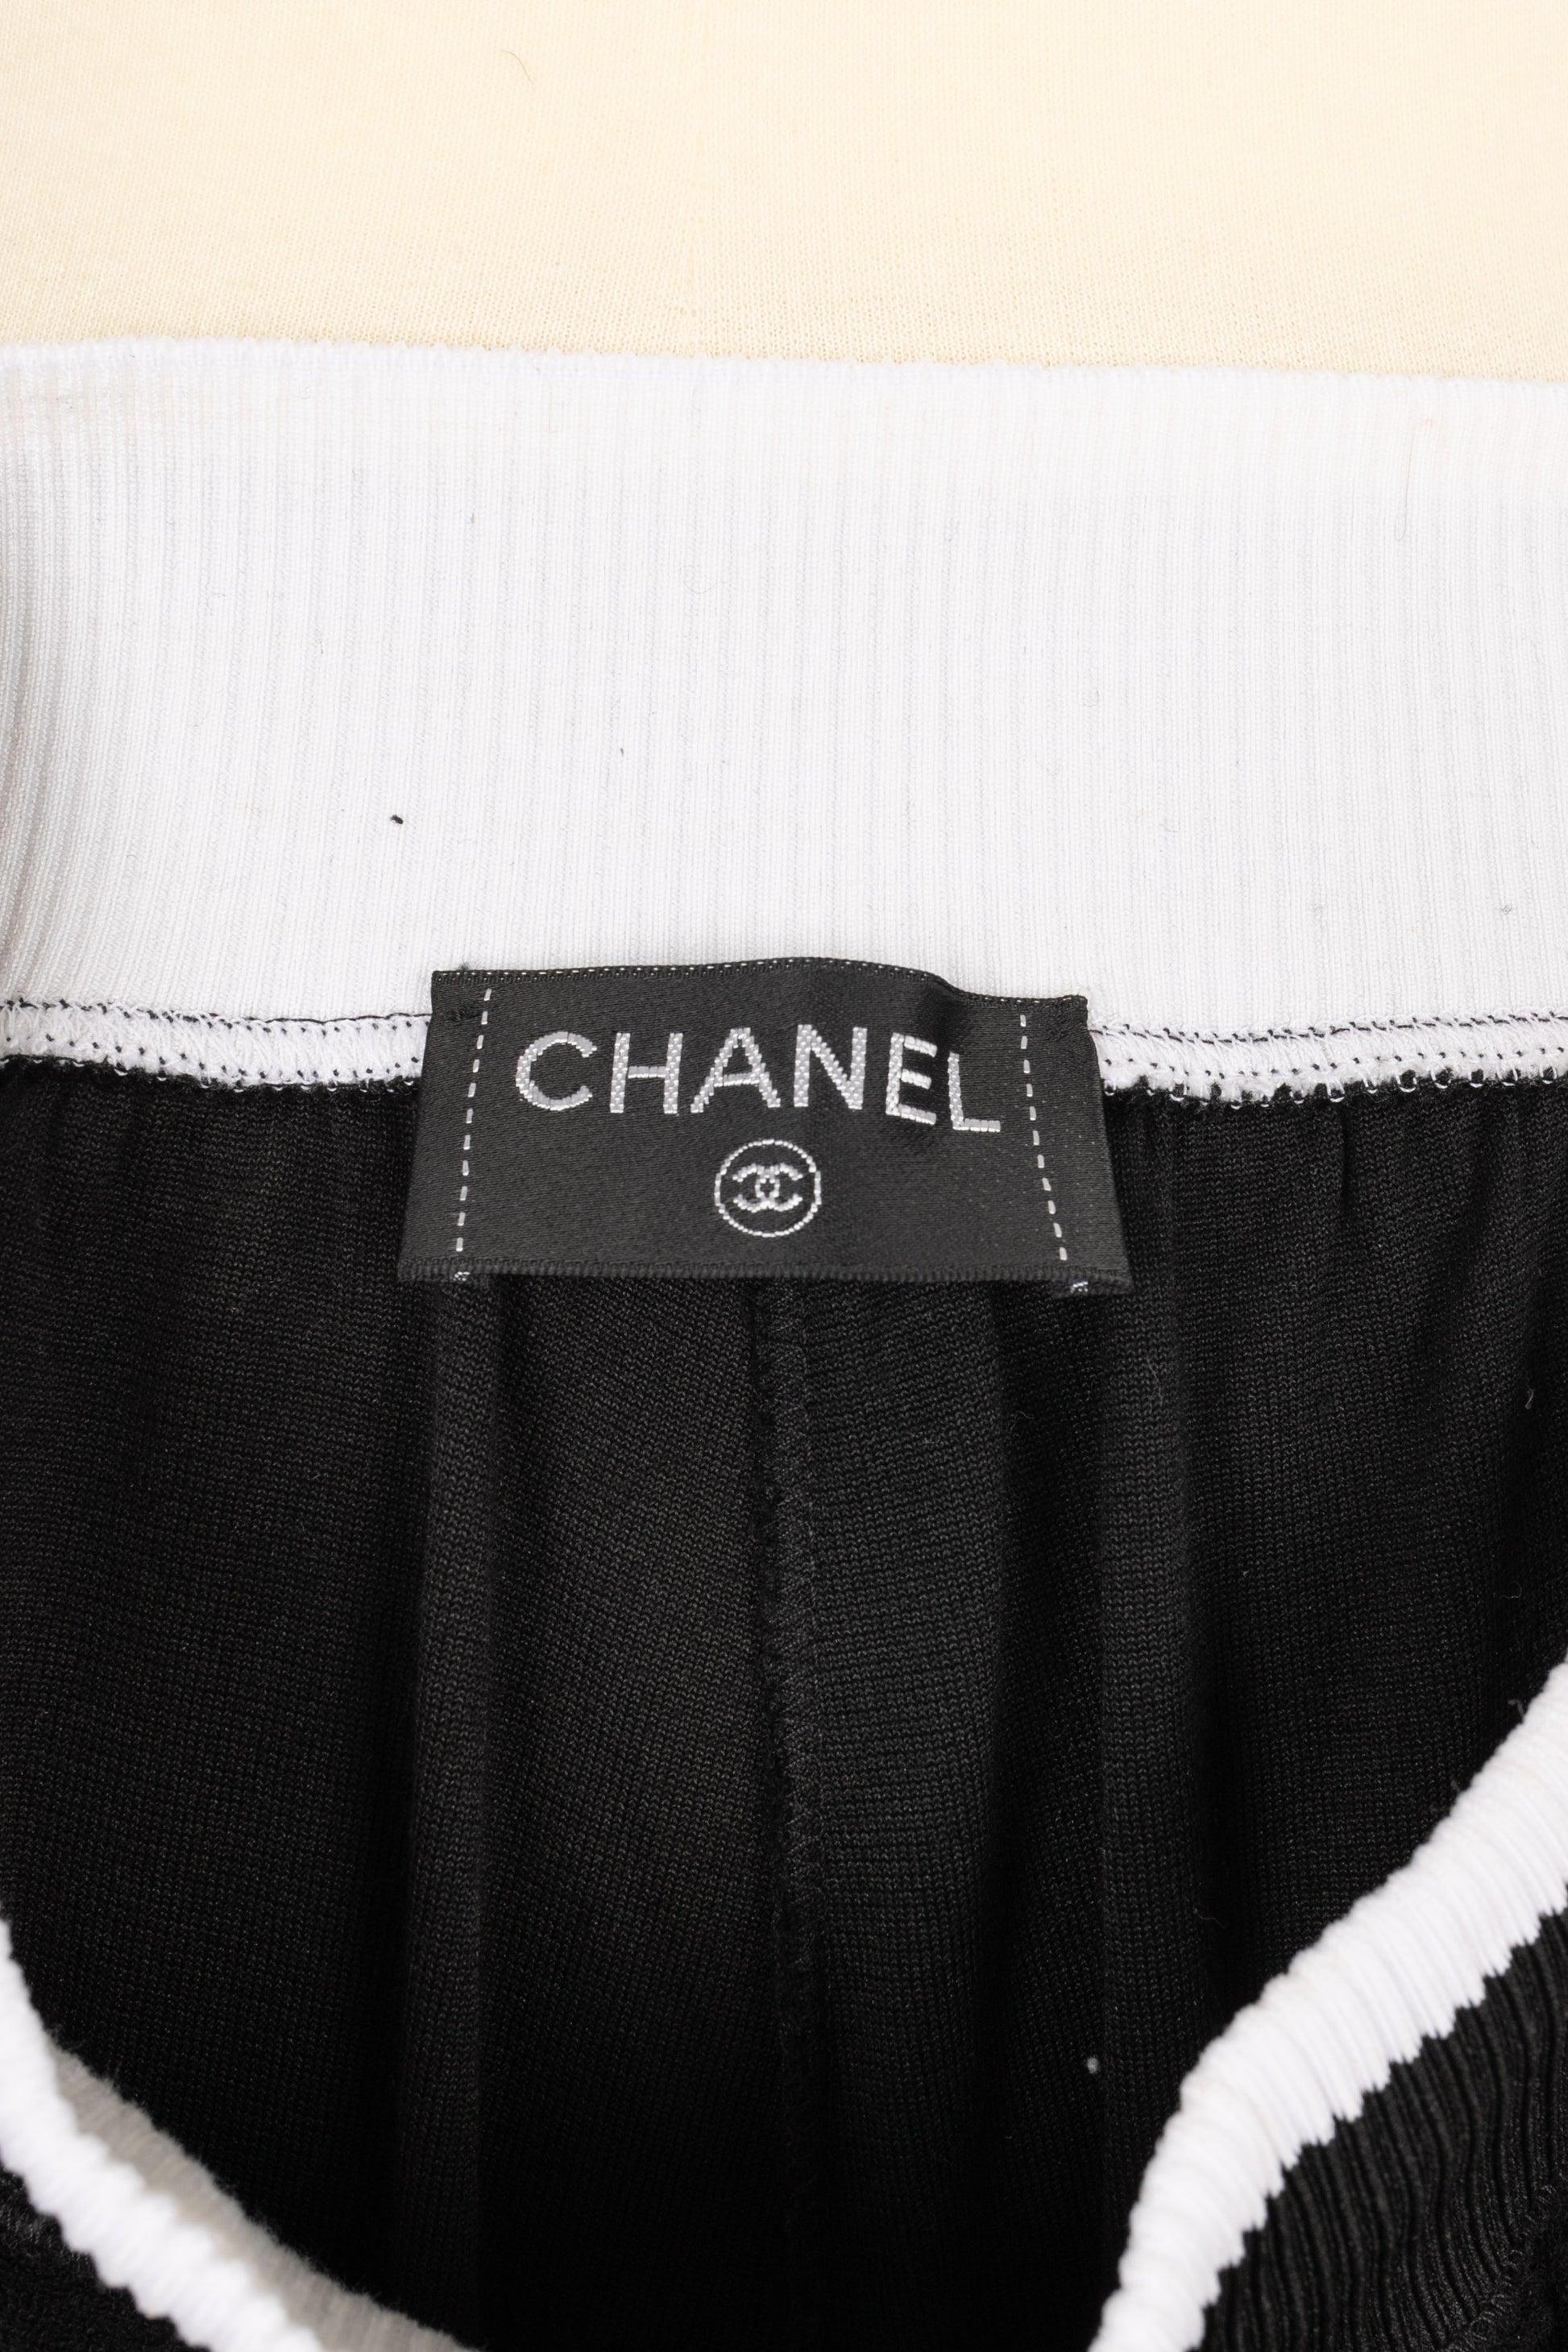 Chanel Terry Cloth Pants 1